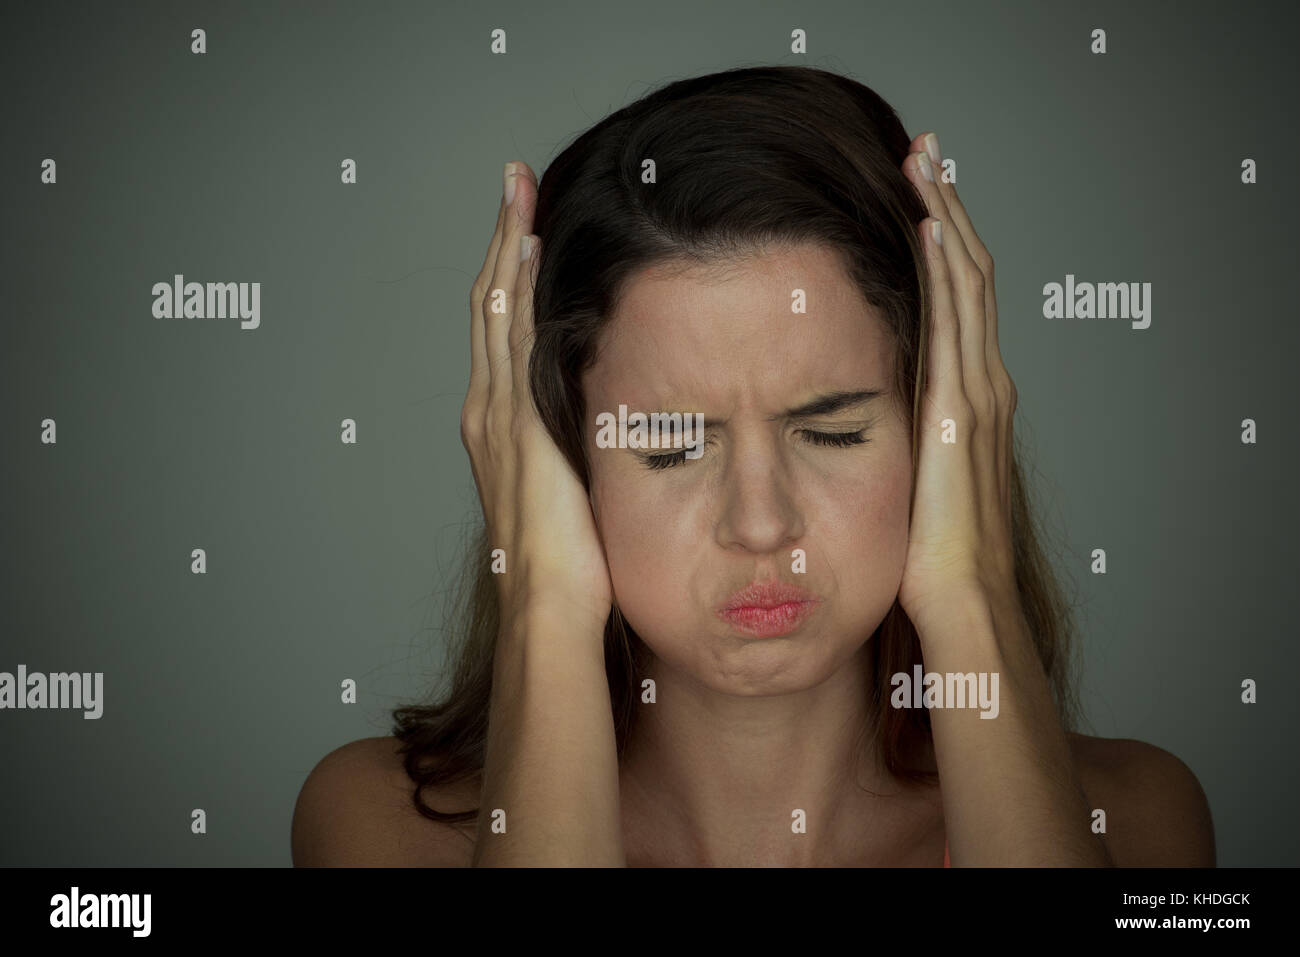 Woman holding hands over ears with eyes closed Stock Photo